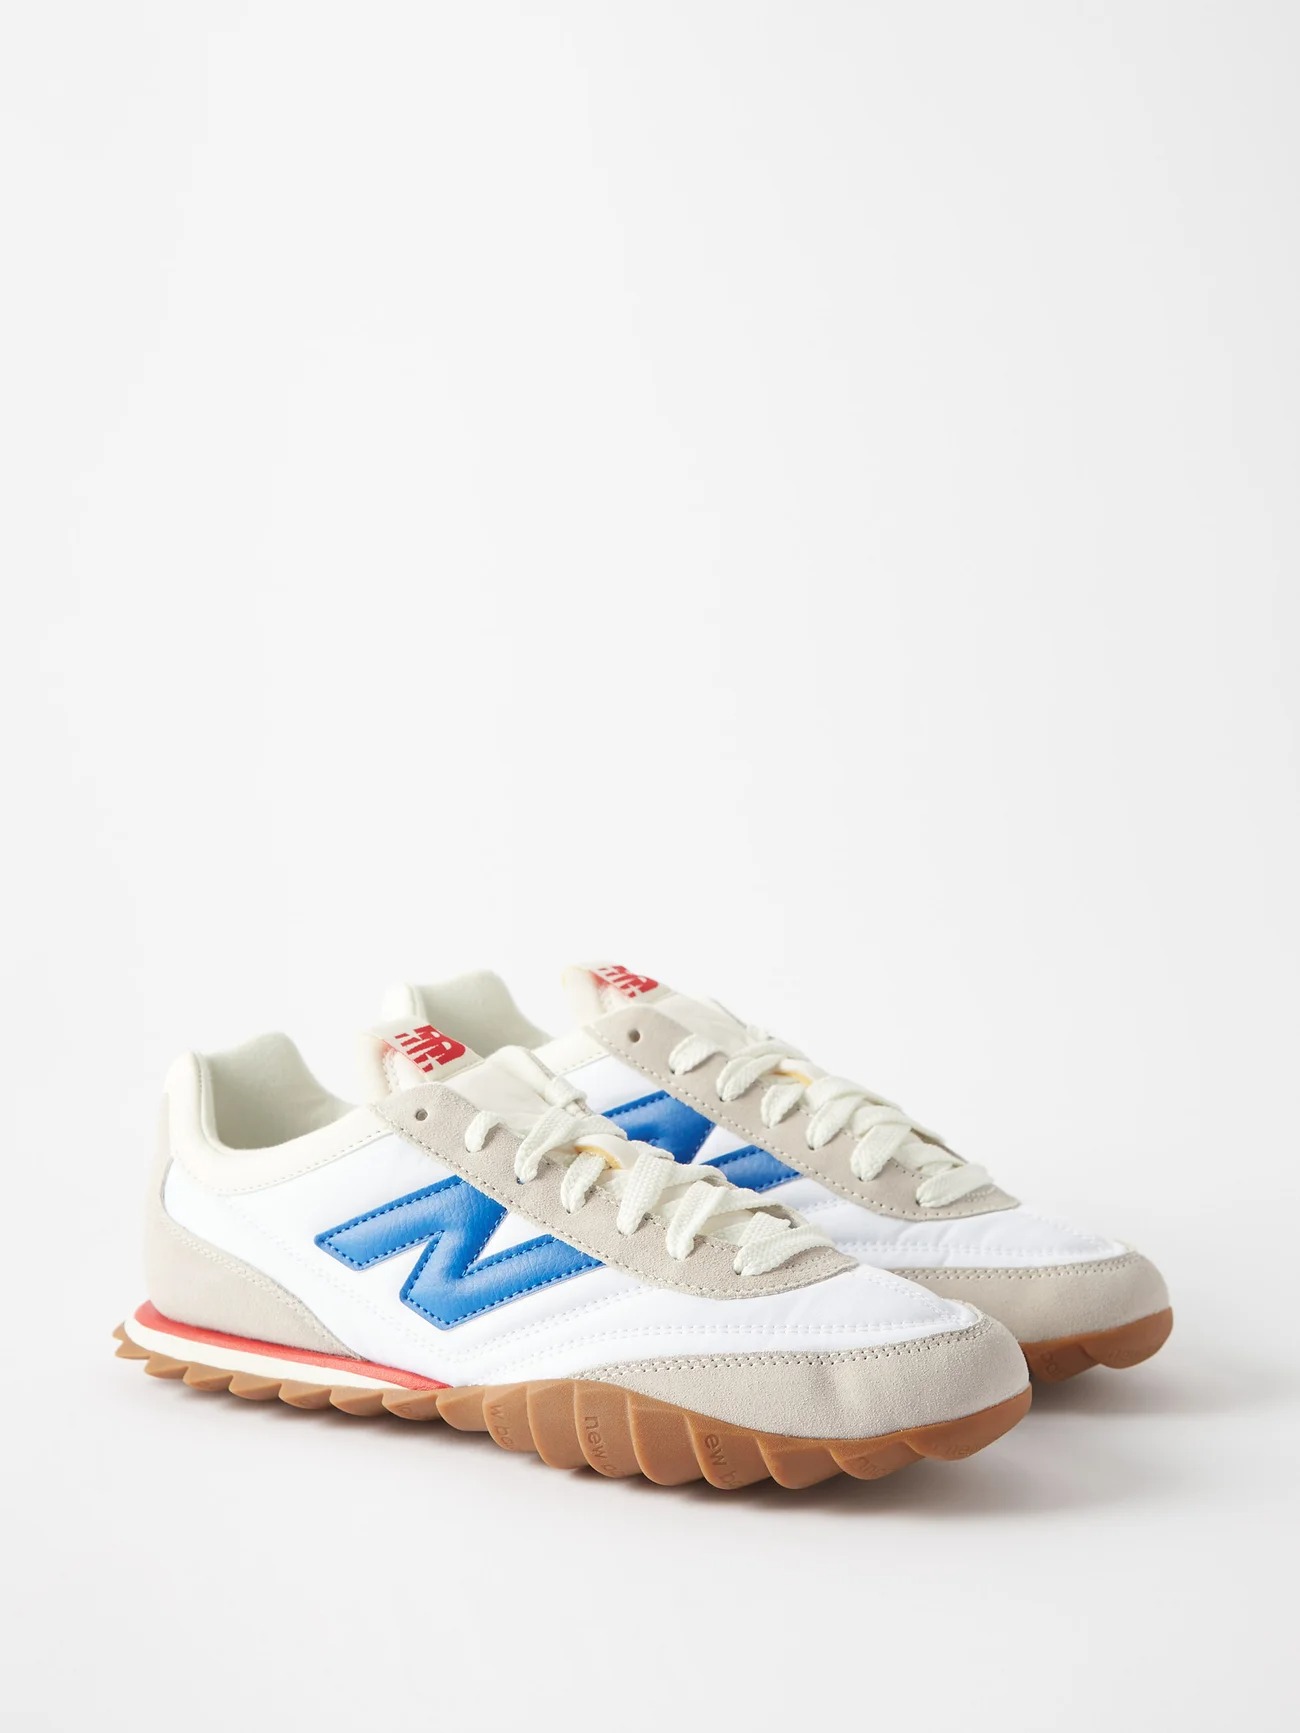 New Balance RC30 “Gump” is Down to $61